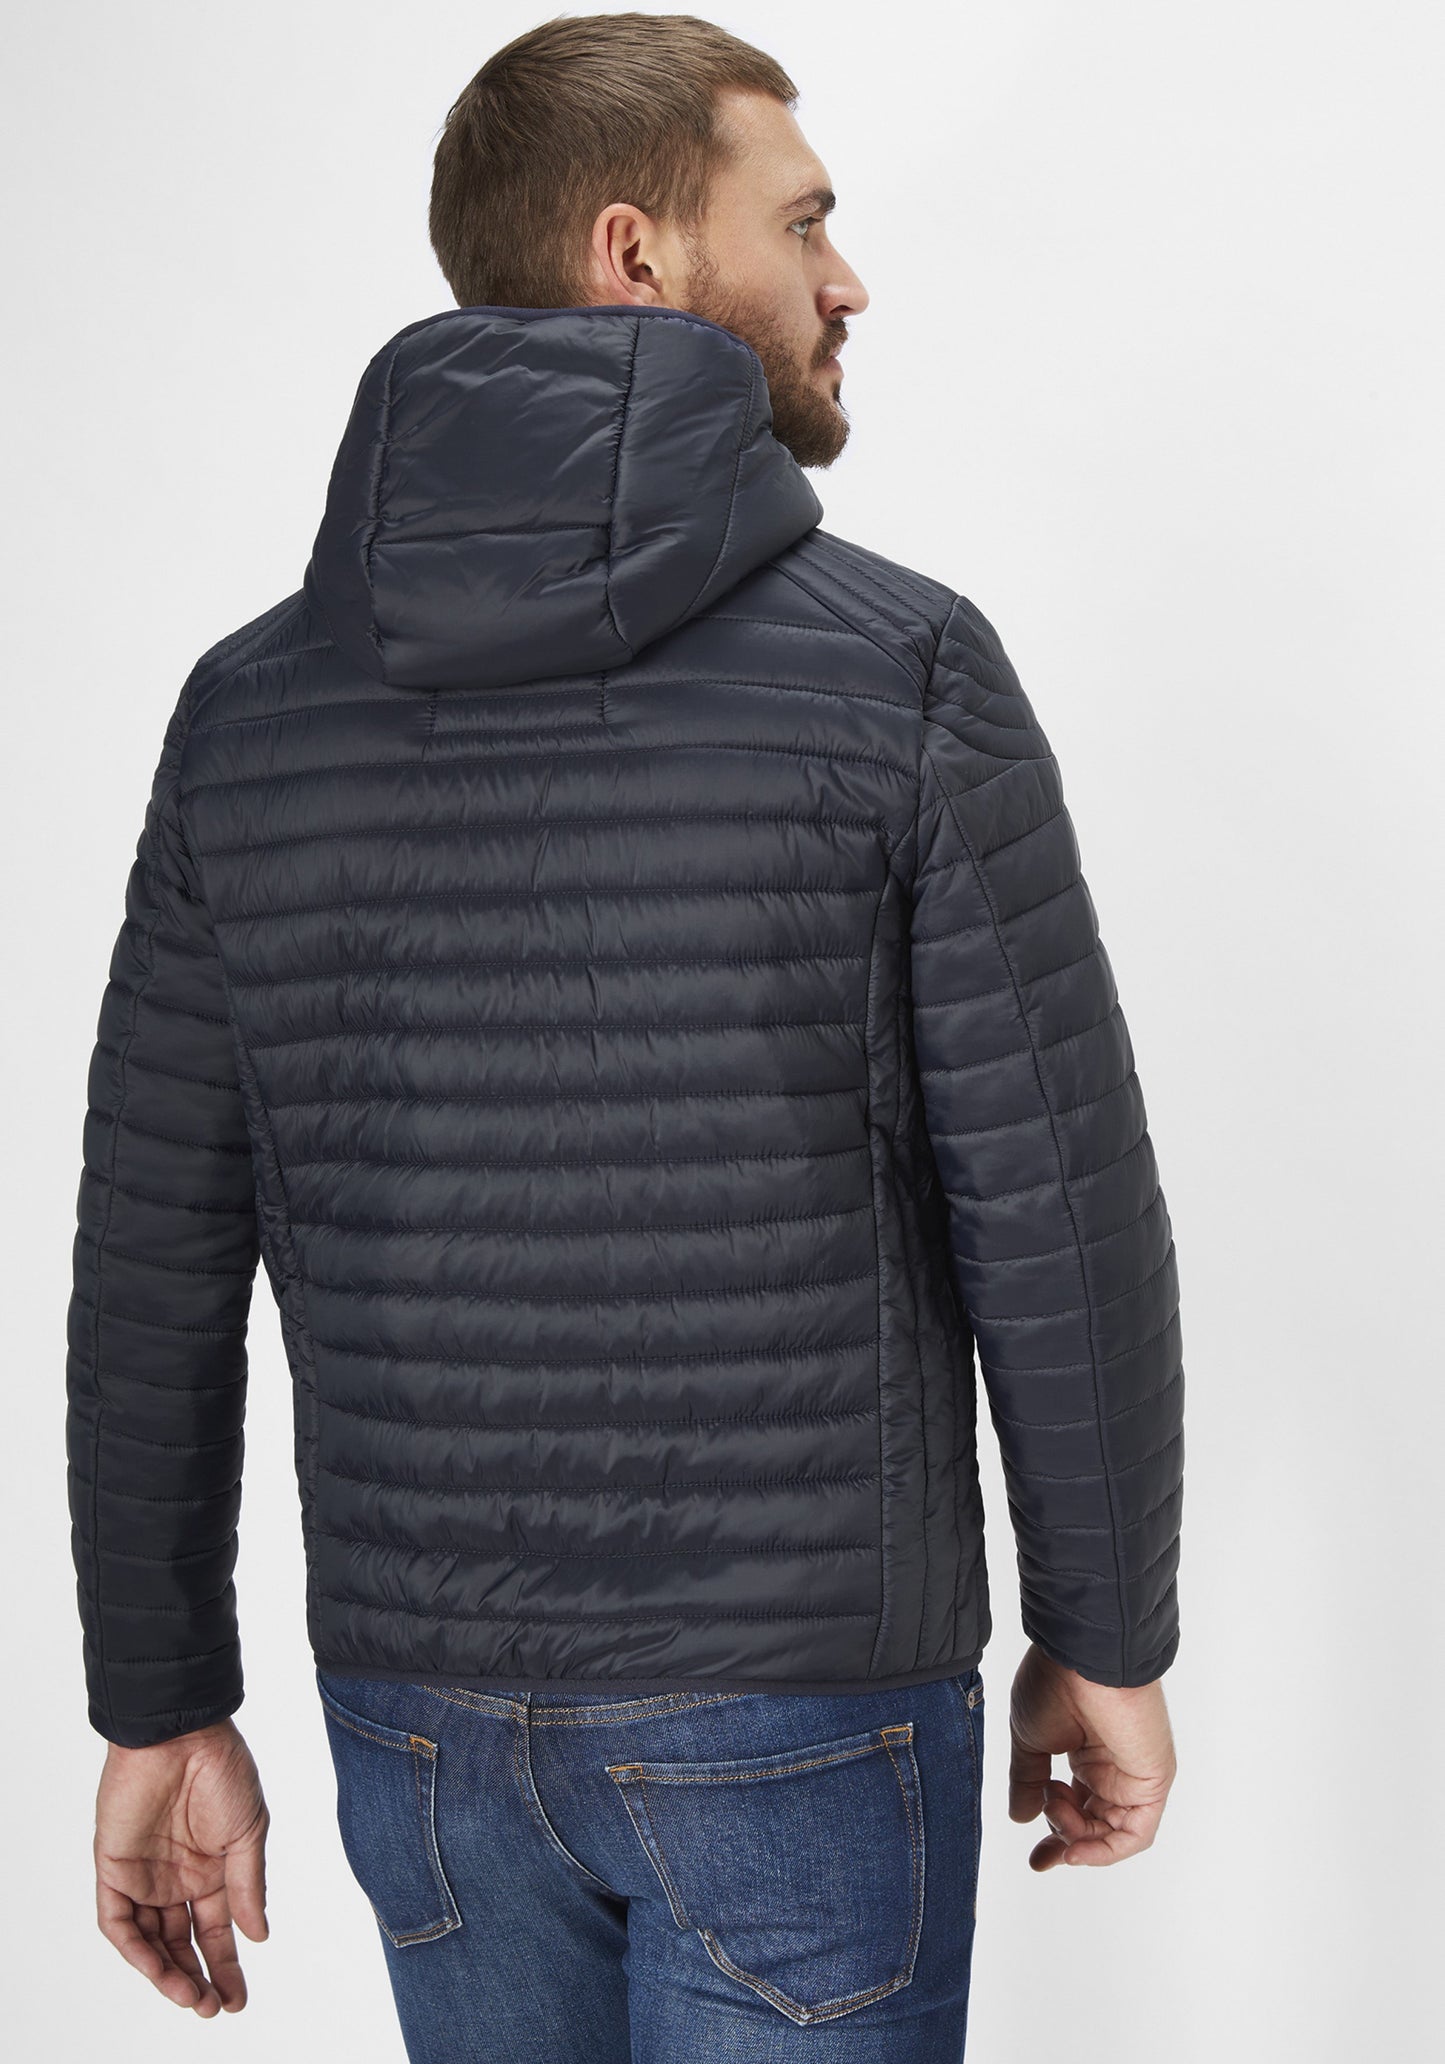 Navy Quilted Goodguy jacket with hood from German brand S4 at StylishGuy Menswear Dublin